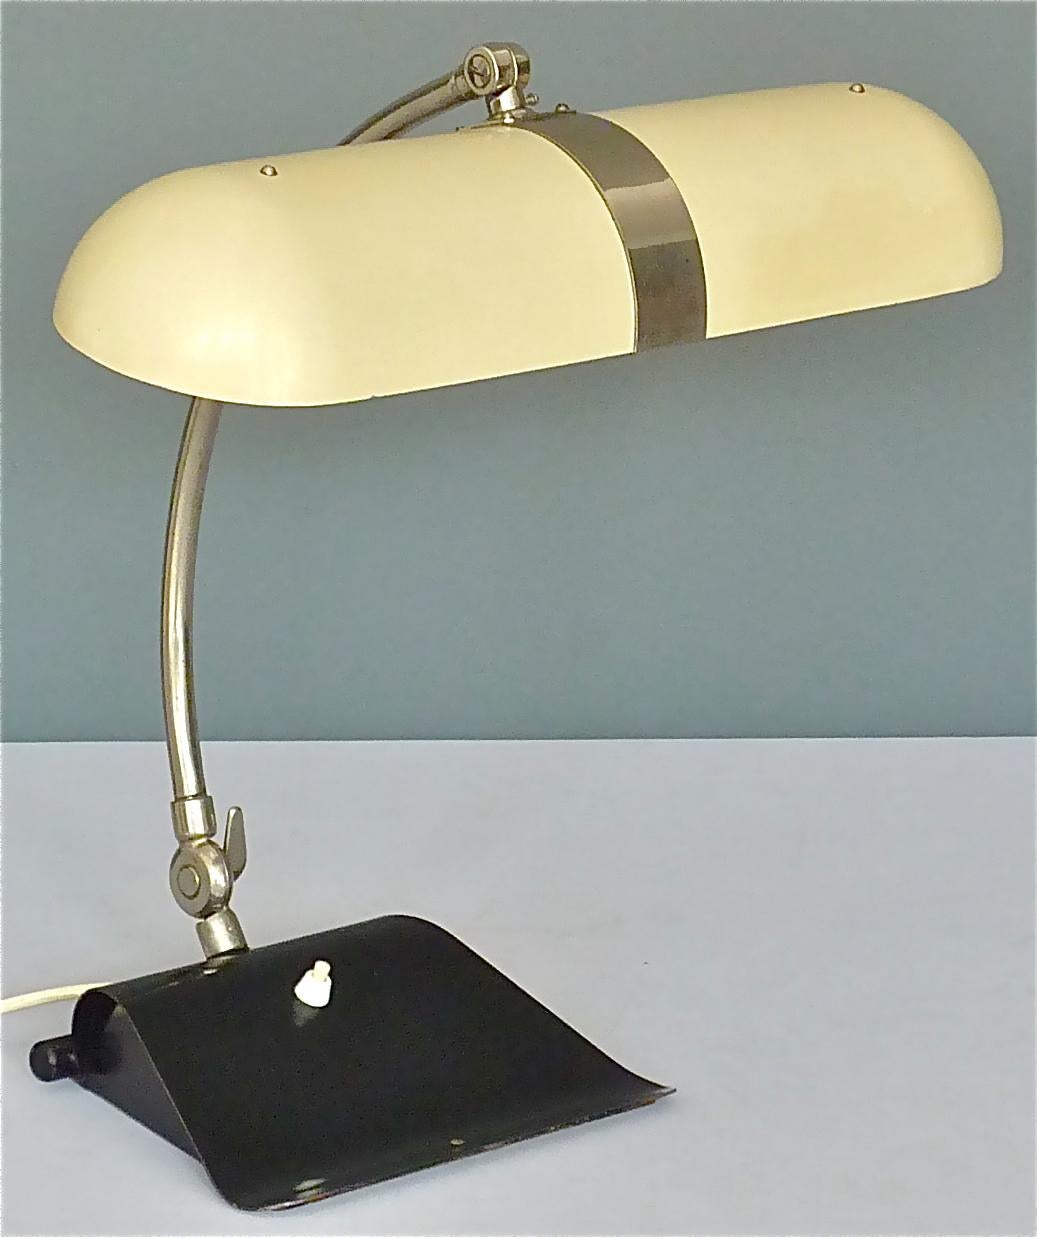 Exceptional and very rare early Kaiser neon tube table lamp which can be dated Germany around 1930-1940. This light has a good-weight black enameled metal base which is 23.5 cm / 9.25 inches wide and 20 cm / 7.87 inches deep, a nickeled brass